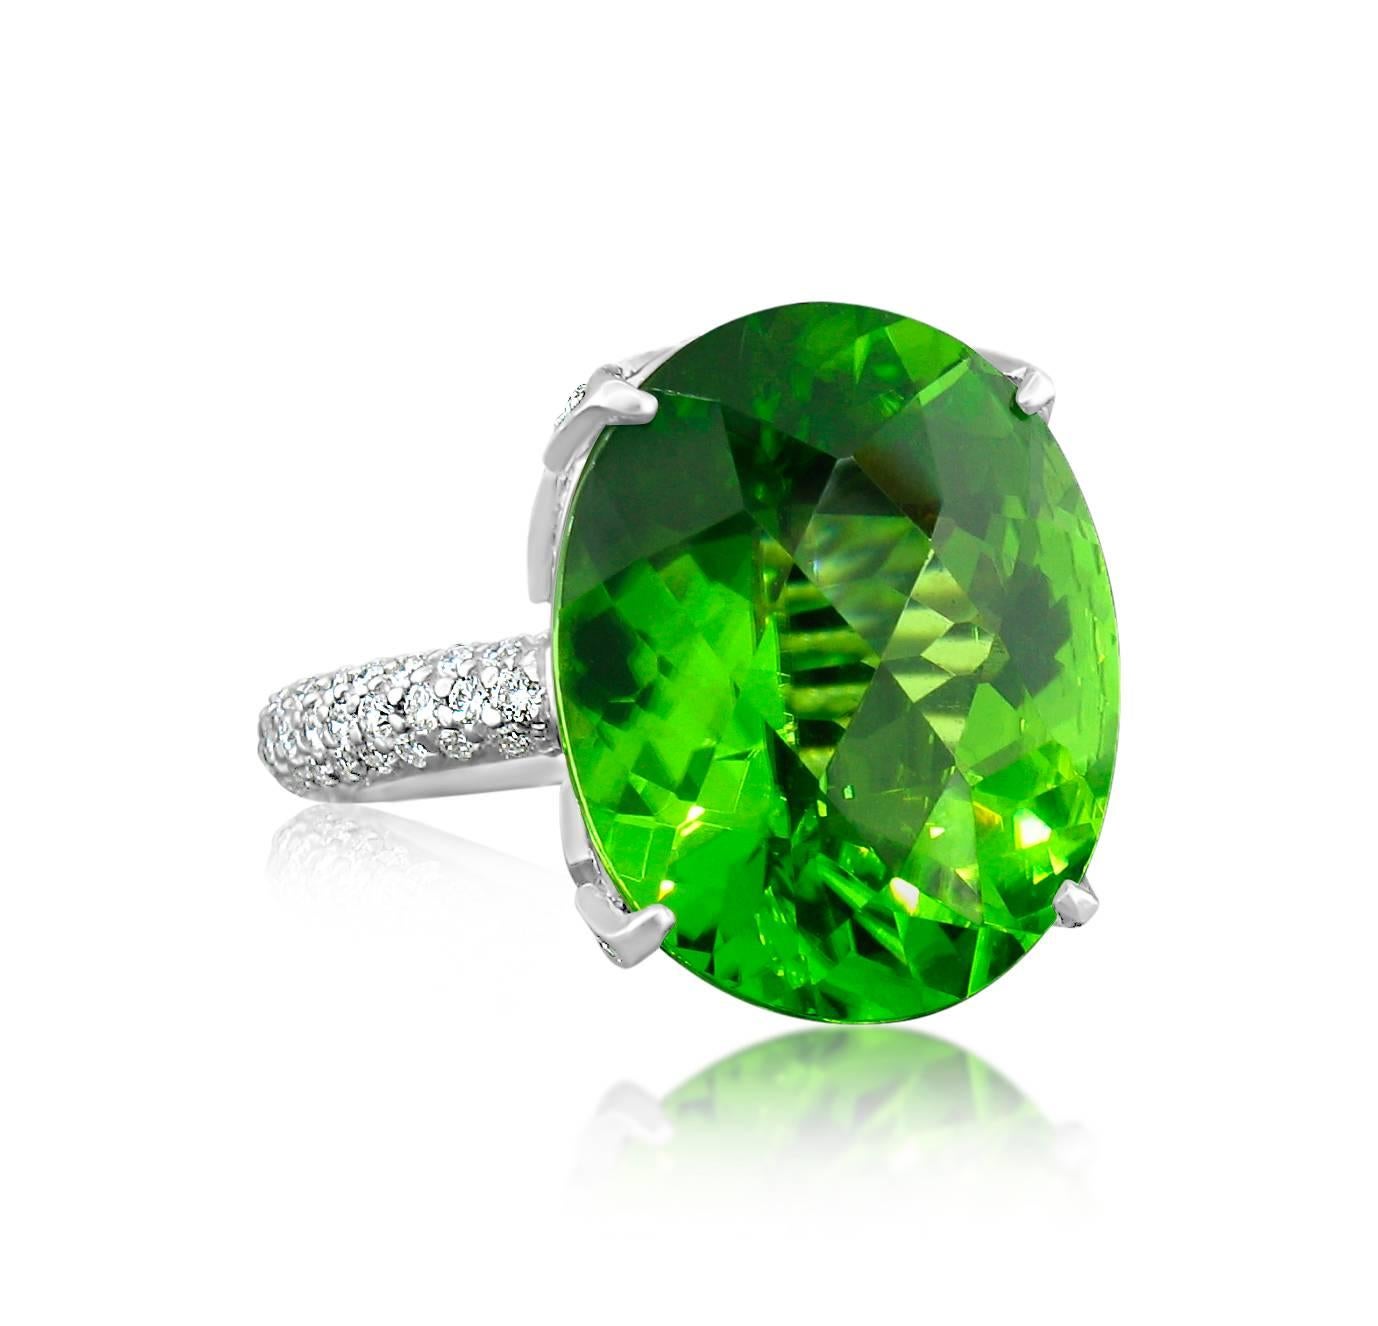 Burmese Peridot is the most desirable of it's kind in the world.  This outstanding example weighs 16.42 carats.  It is set in a gorgeous platinum setting pave set with 1.50 carats in Diamonds.  Size 7 1/2.
**This ring may be resized to fit after